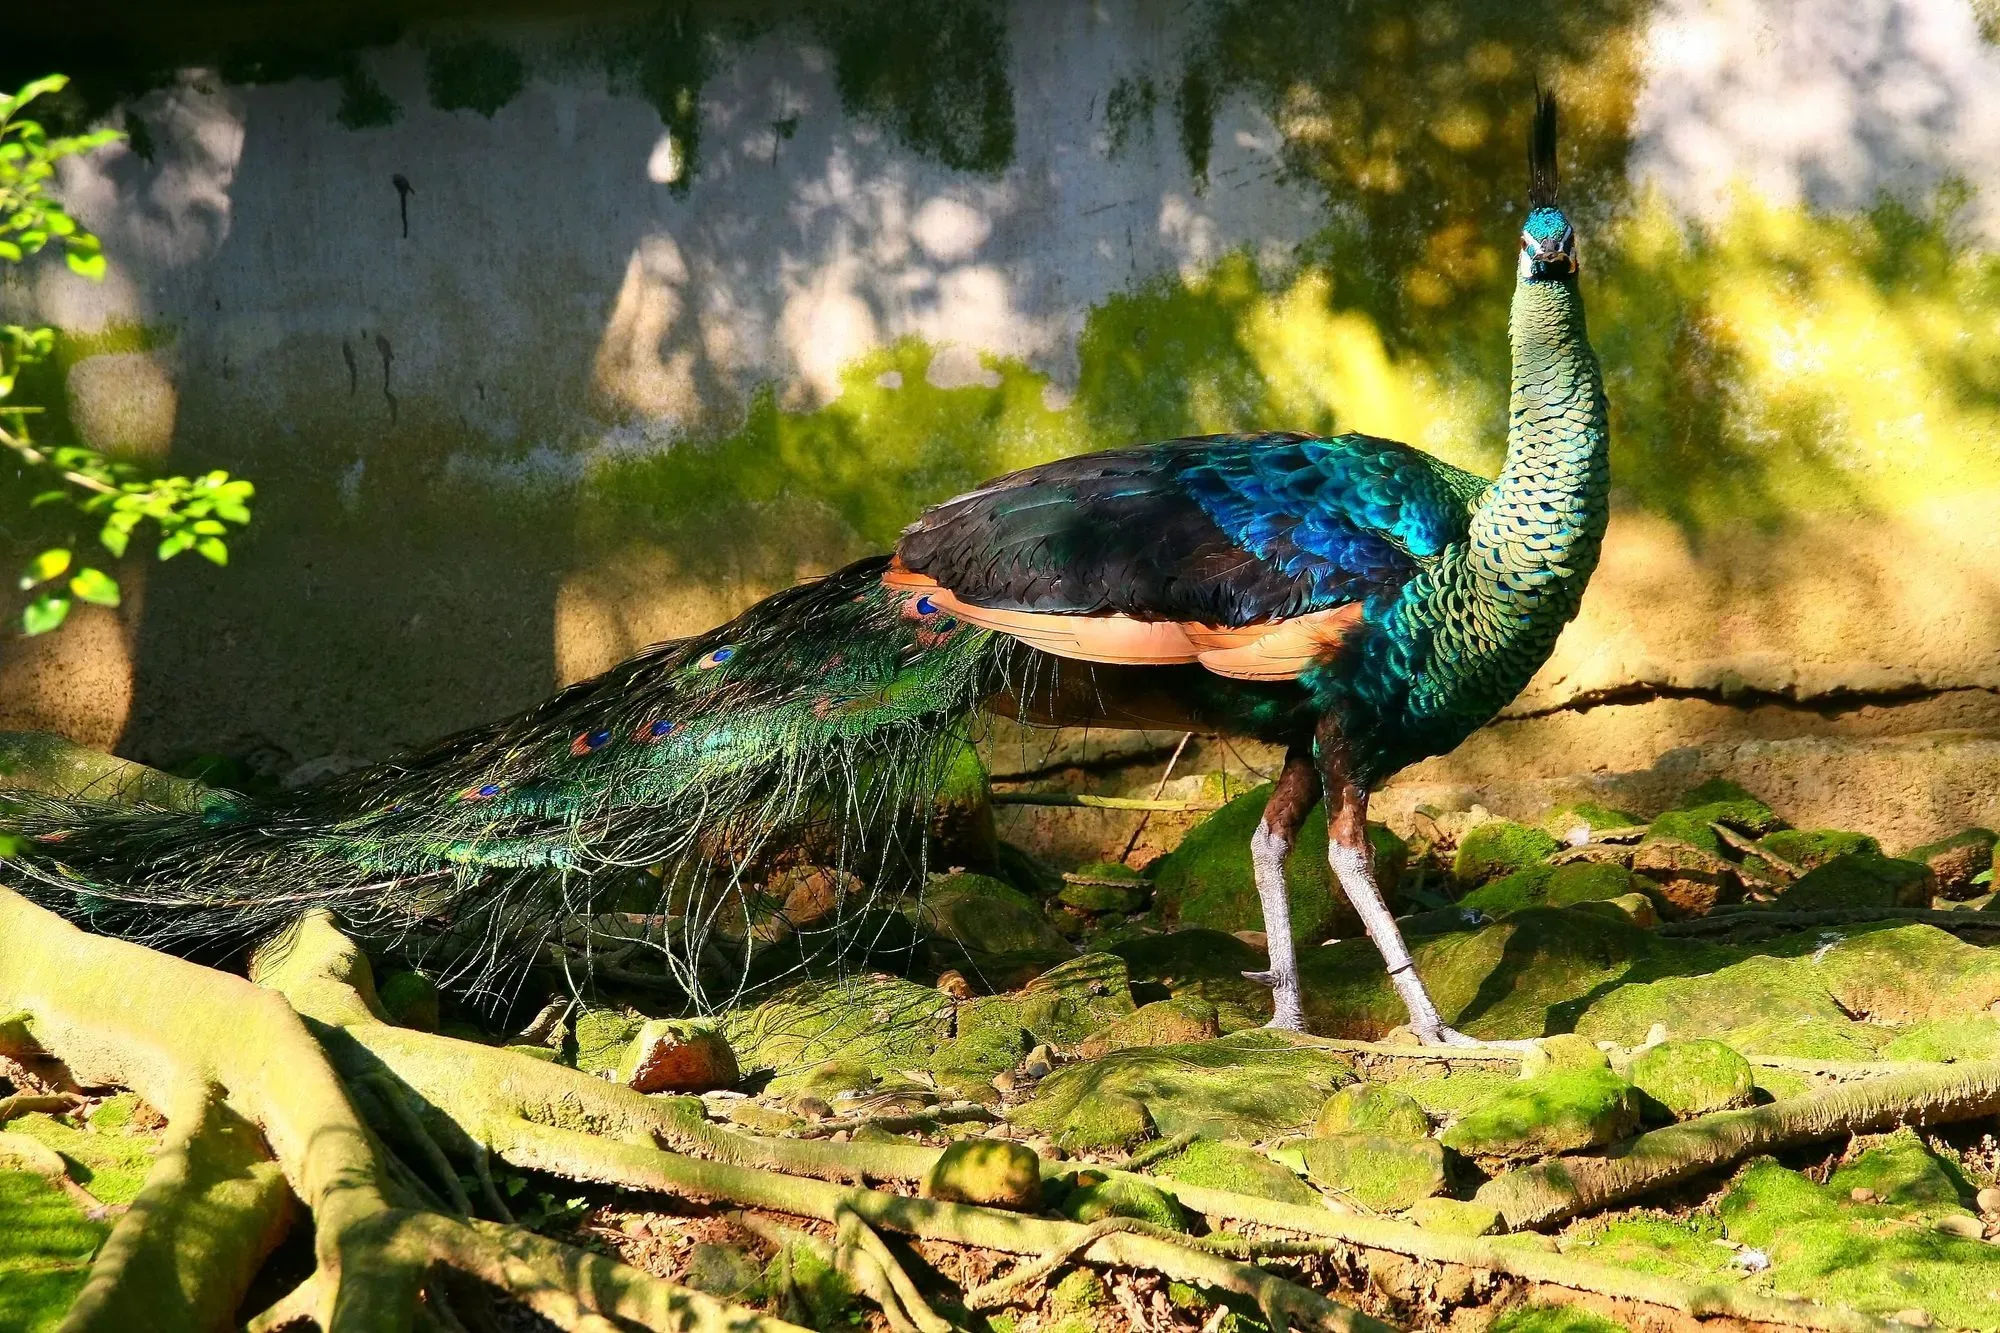 The green peafowl's feathers are blue and green.